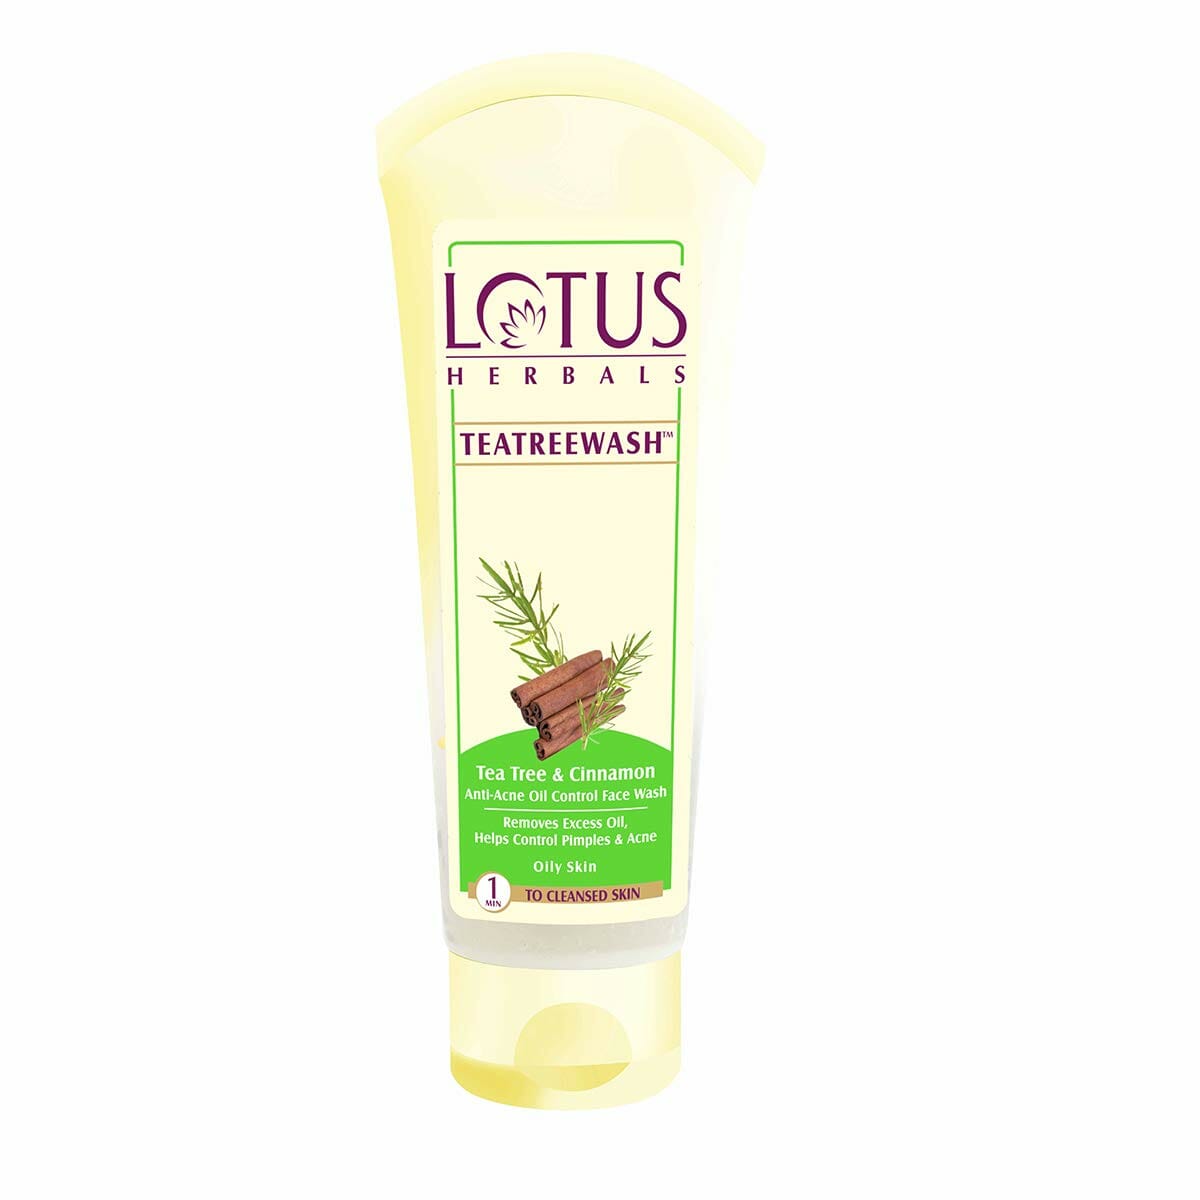 Lotus Herbals Tea Tree And Cinnamon Anti-Acne Oil Control Face Wash Best Face Wash For Oily Skin In Pakistan